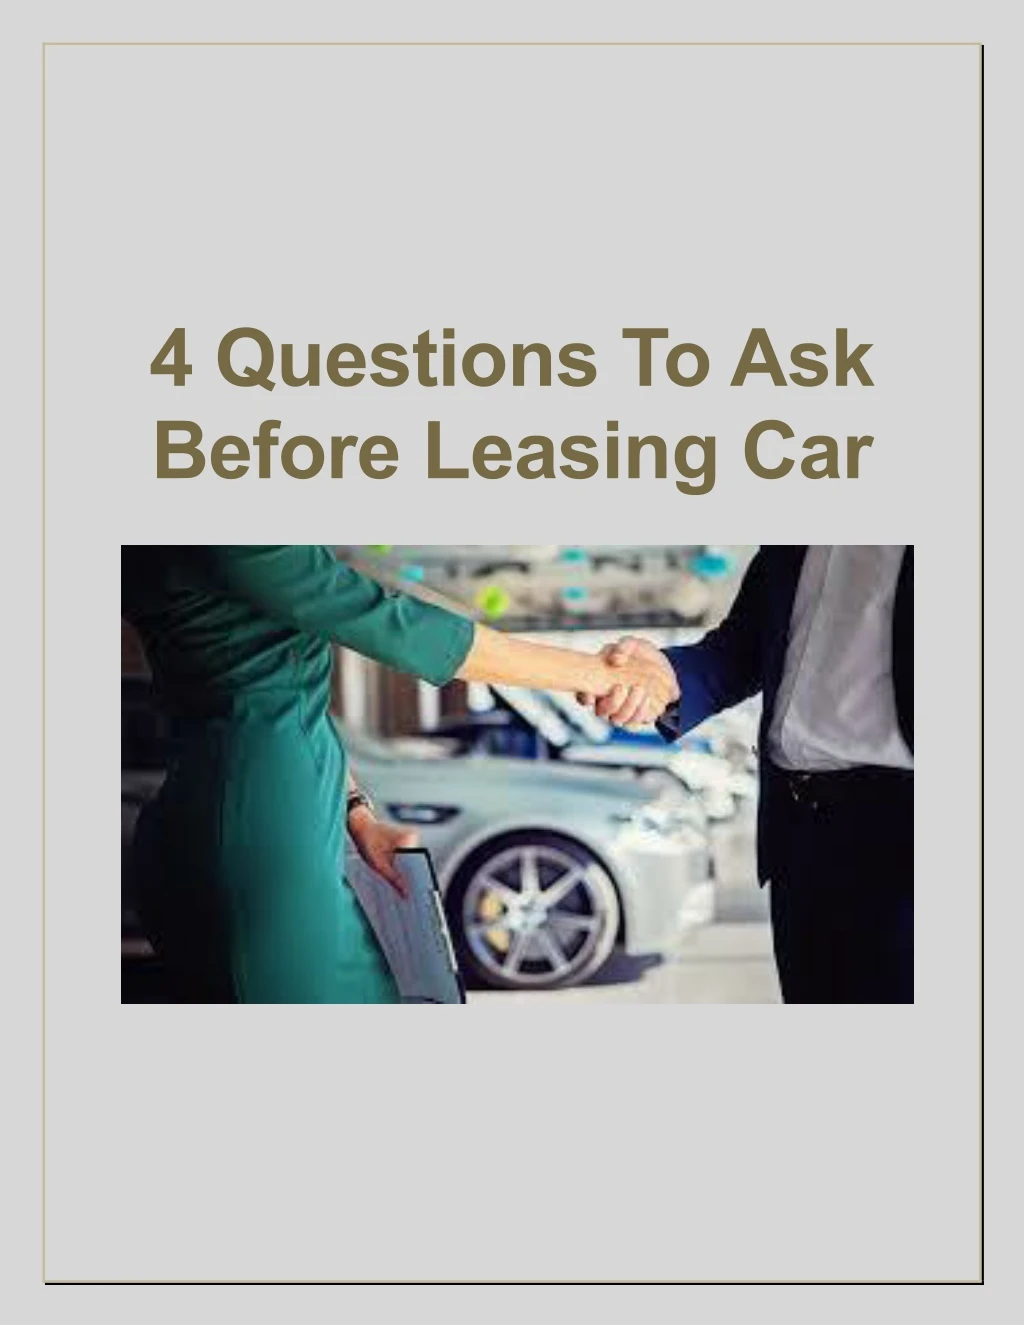 4 questions to ask before leasing car